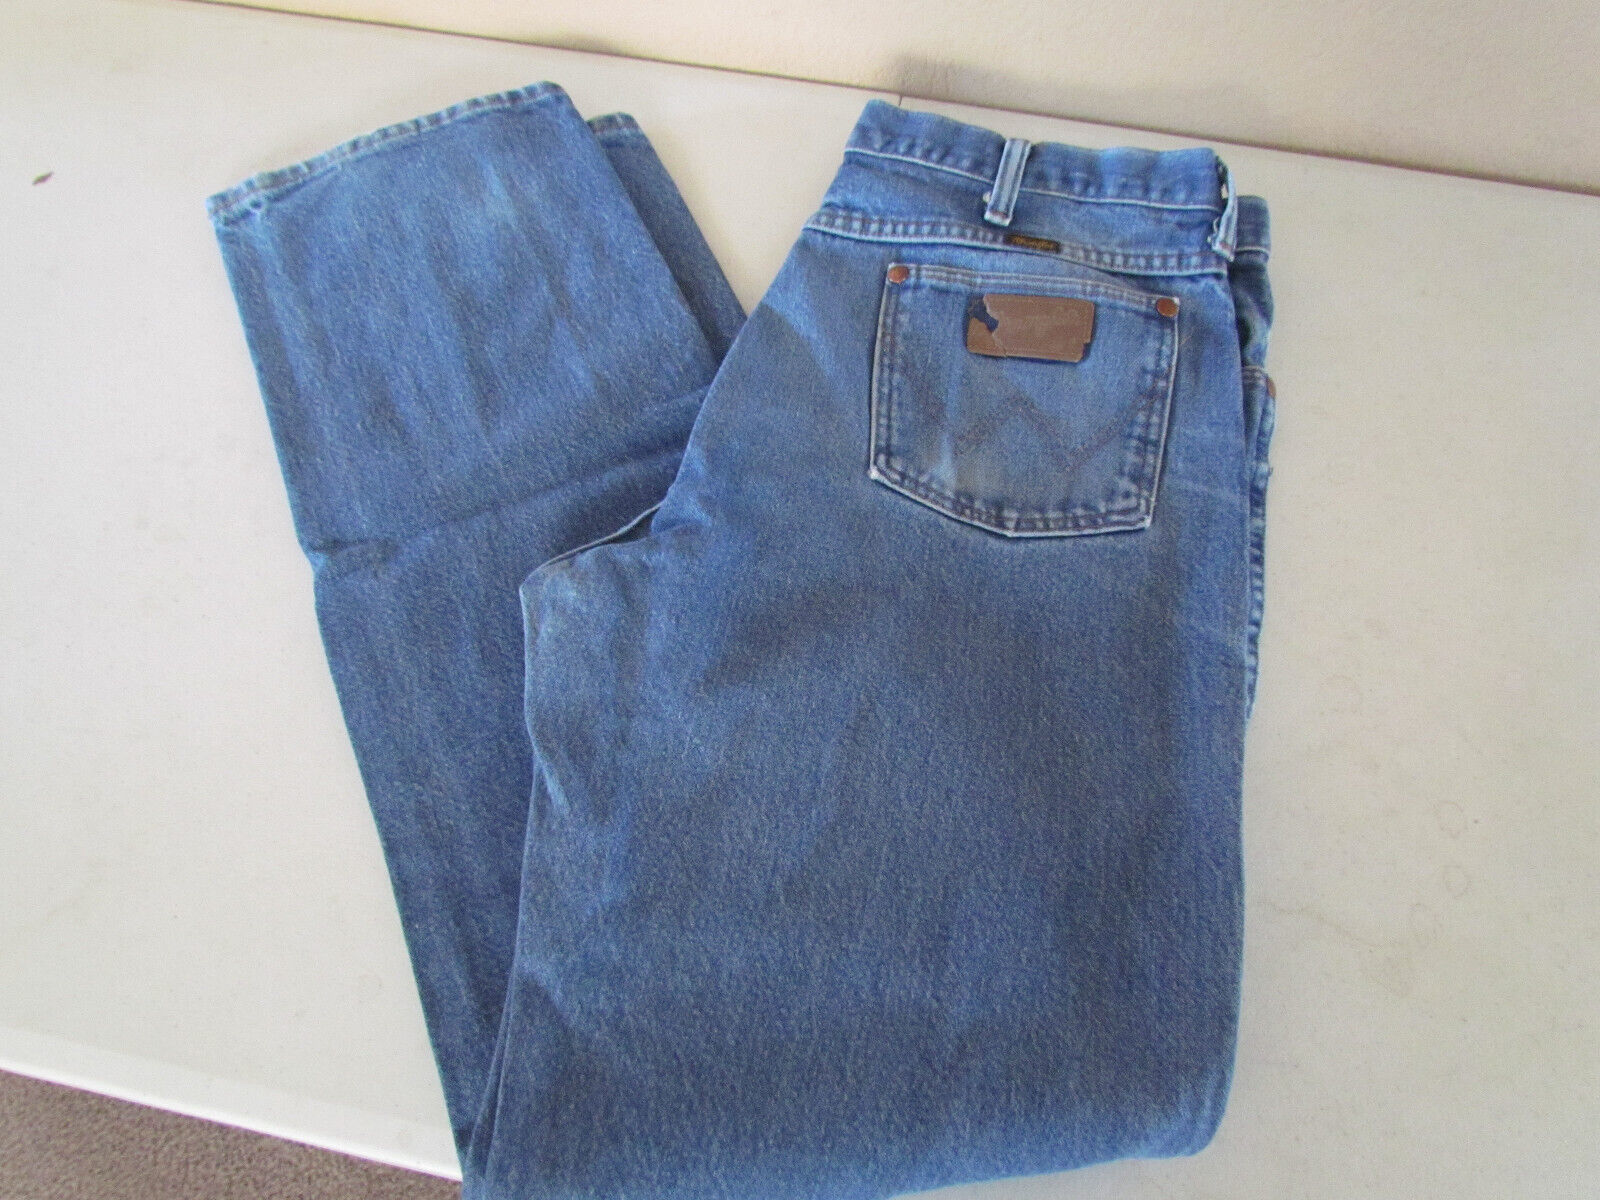 Primary image for Wrangler Men's 35X34 Jeans Blue Denim Pants - Some Fade, Fraying